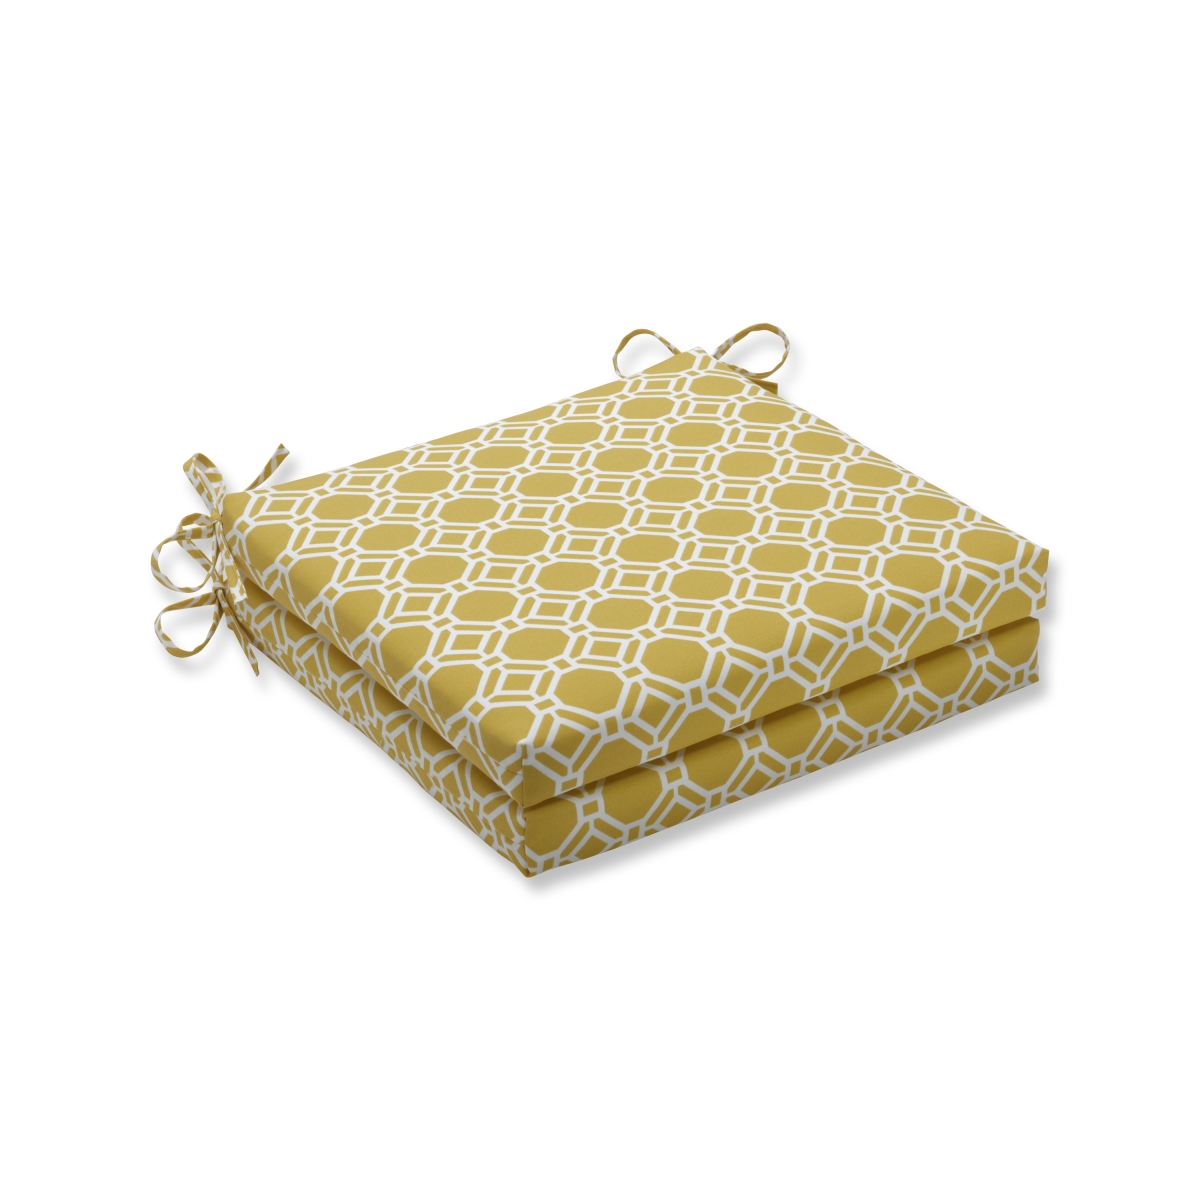 20 X 20 X 3 In. Outdoor & Indoor Rossmere Sunshine Squared Corners Seat Cushion, Yellow - Set Of 2